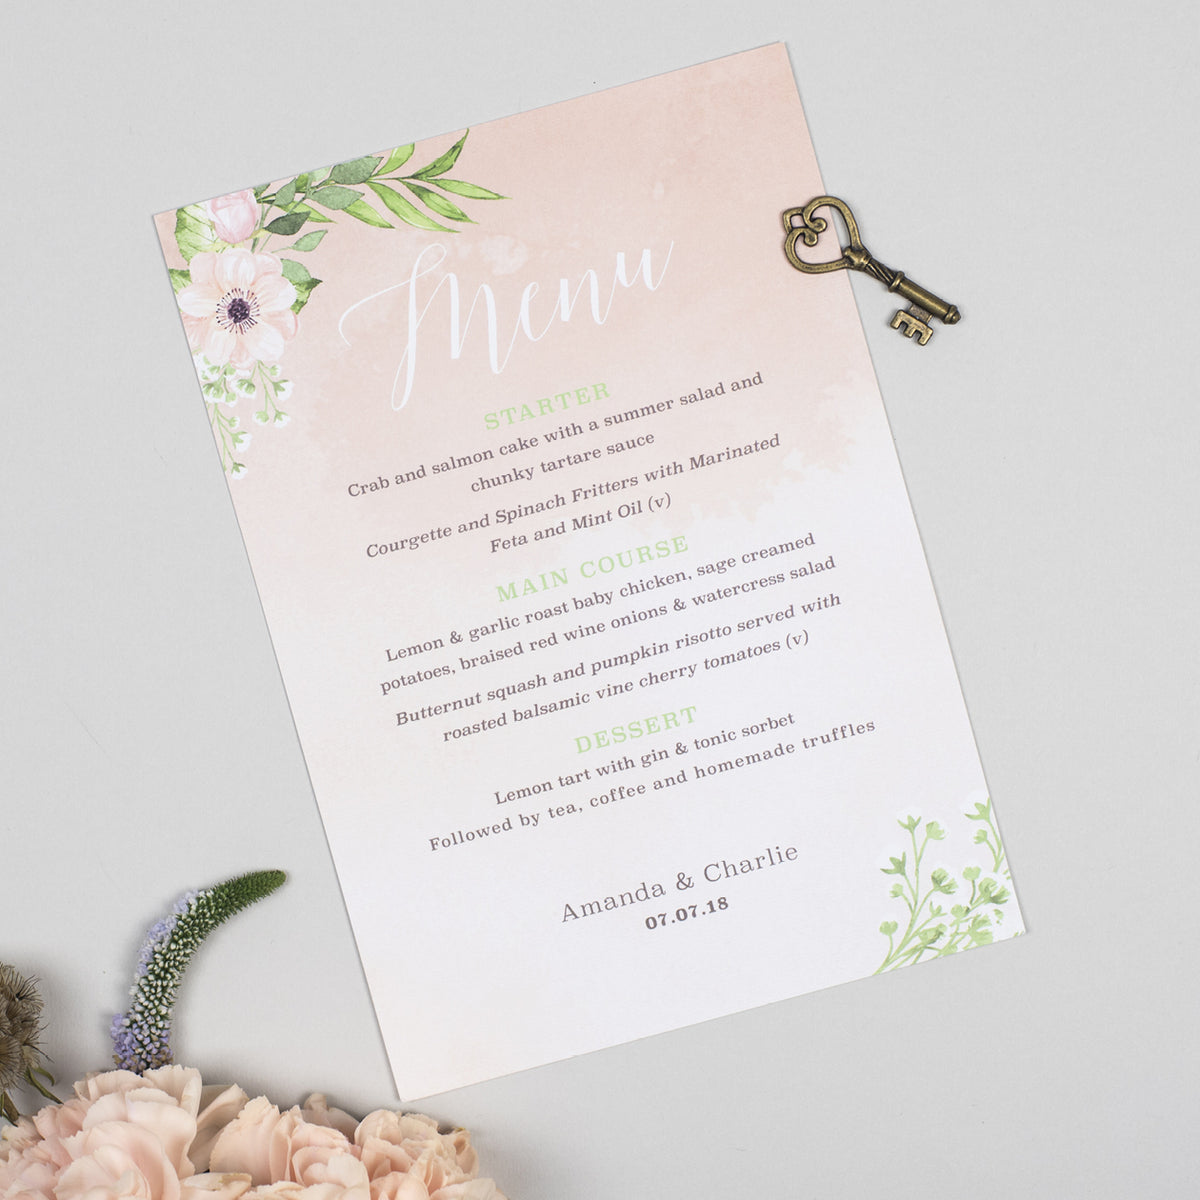 Eloise Menu Cards | Wedding invitations and stationery